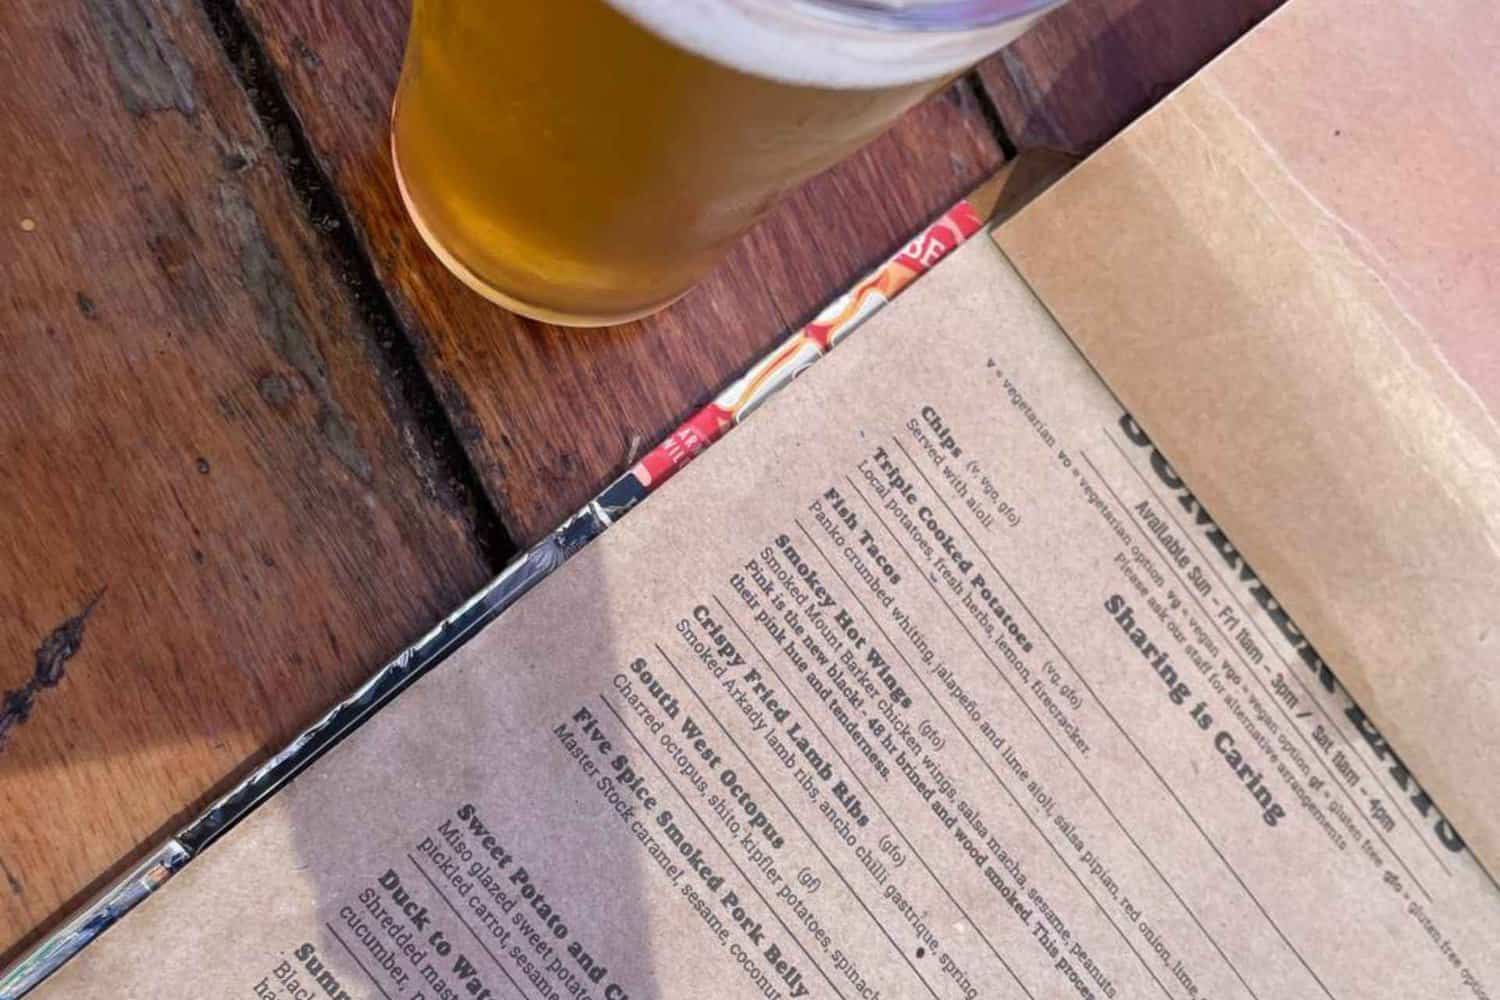 A menu at the Beerfarm Margaret River displayed on a wooden table accompanied by a glass of beer. The menu features a variety of dishes, ranging from burgers and fries to share plates and desserts. 